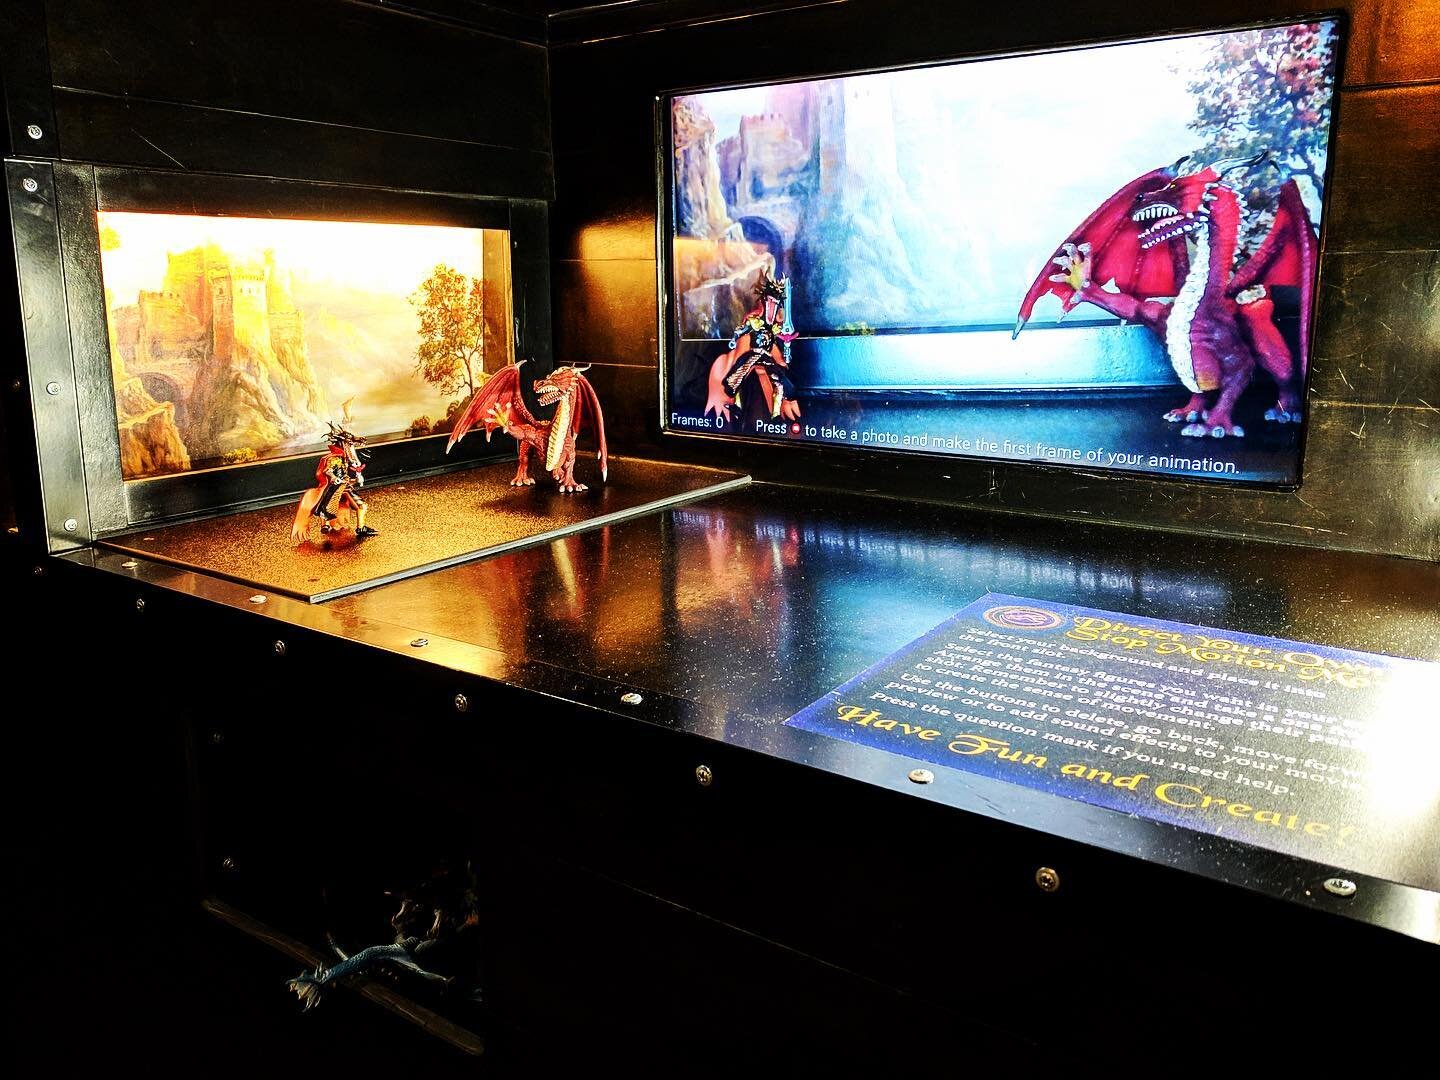 The Lost World of Dragons exhibit features many interactive experiences. One of these lets visitors create their own unique stop motion movie with detailed dragons and fanciful backdrops.

#stage9exhibits #stopmotionanimation #lostworldofdragons #sto